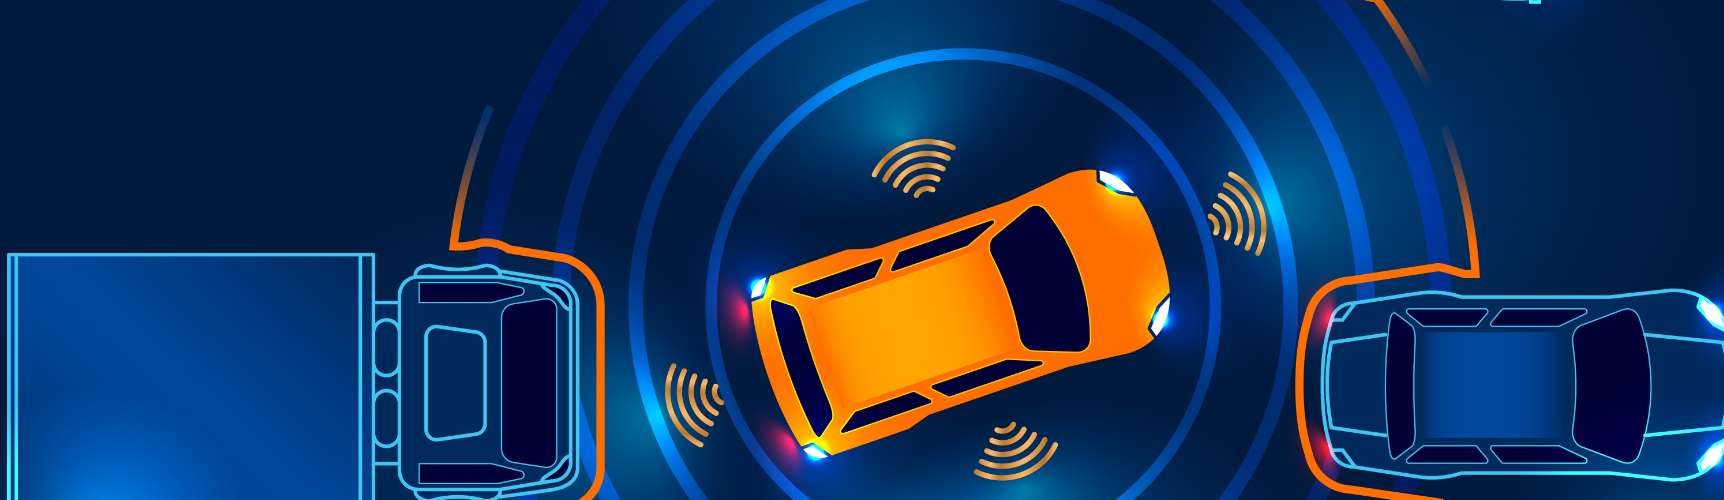 Enhanced driver experience by developing an autonomous parking solution for a tier-1 automotive software solution provider